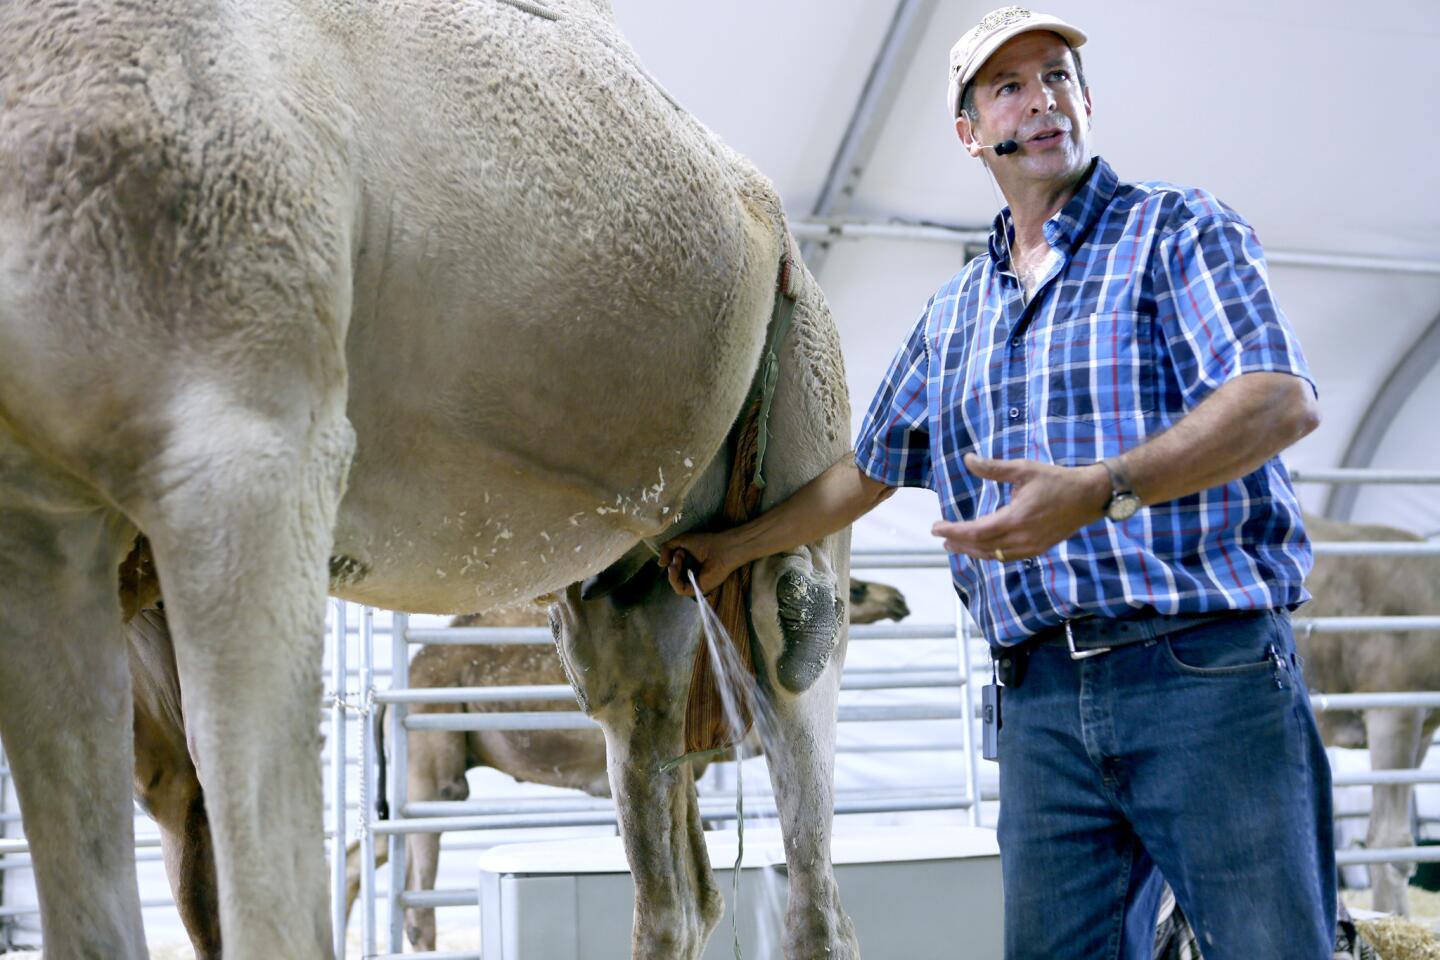 Gil Riegler, owner of Oasis Camel Dairy, shows how a camel is milked during a demonstration about camels at the Orange County Fair in Costa Mesa on Wednesday, August 2, 2017.